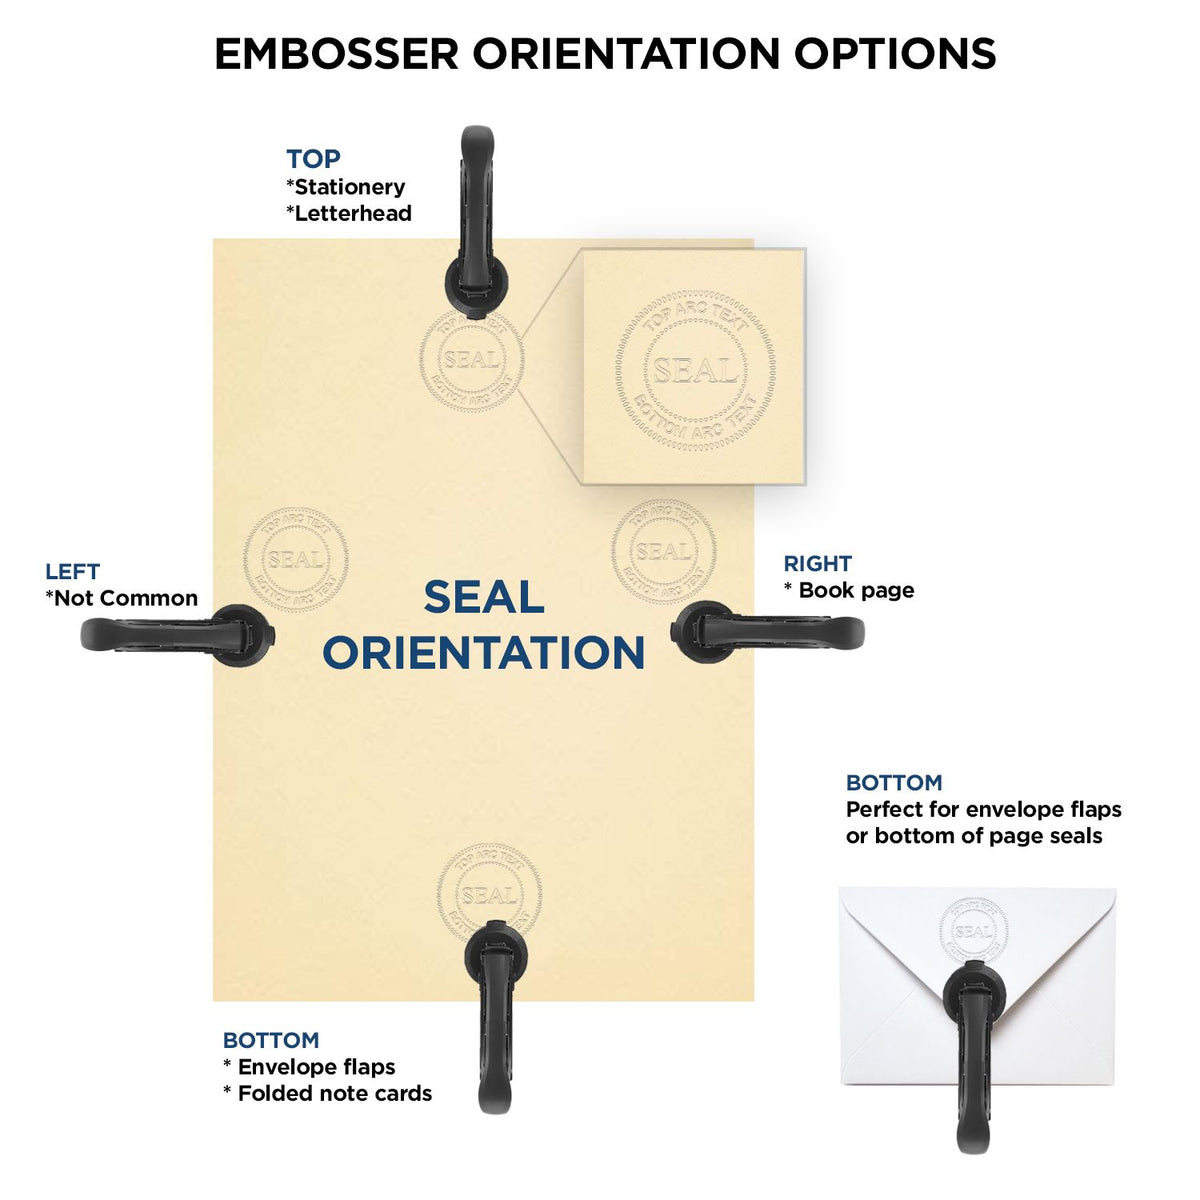 An infographic for the State of New Mexico Long Reach Architectural Embossing Seal showing embosser orientation, this is showing examples of a top, bottom, right and left insert.